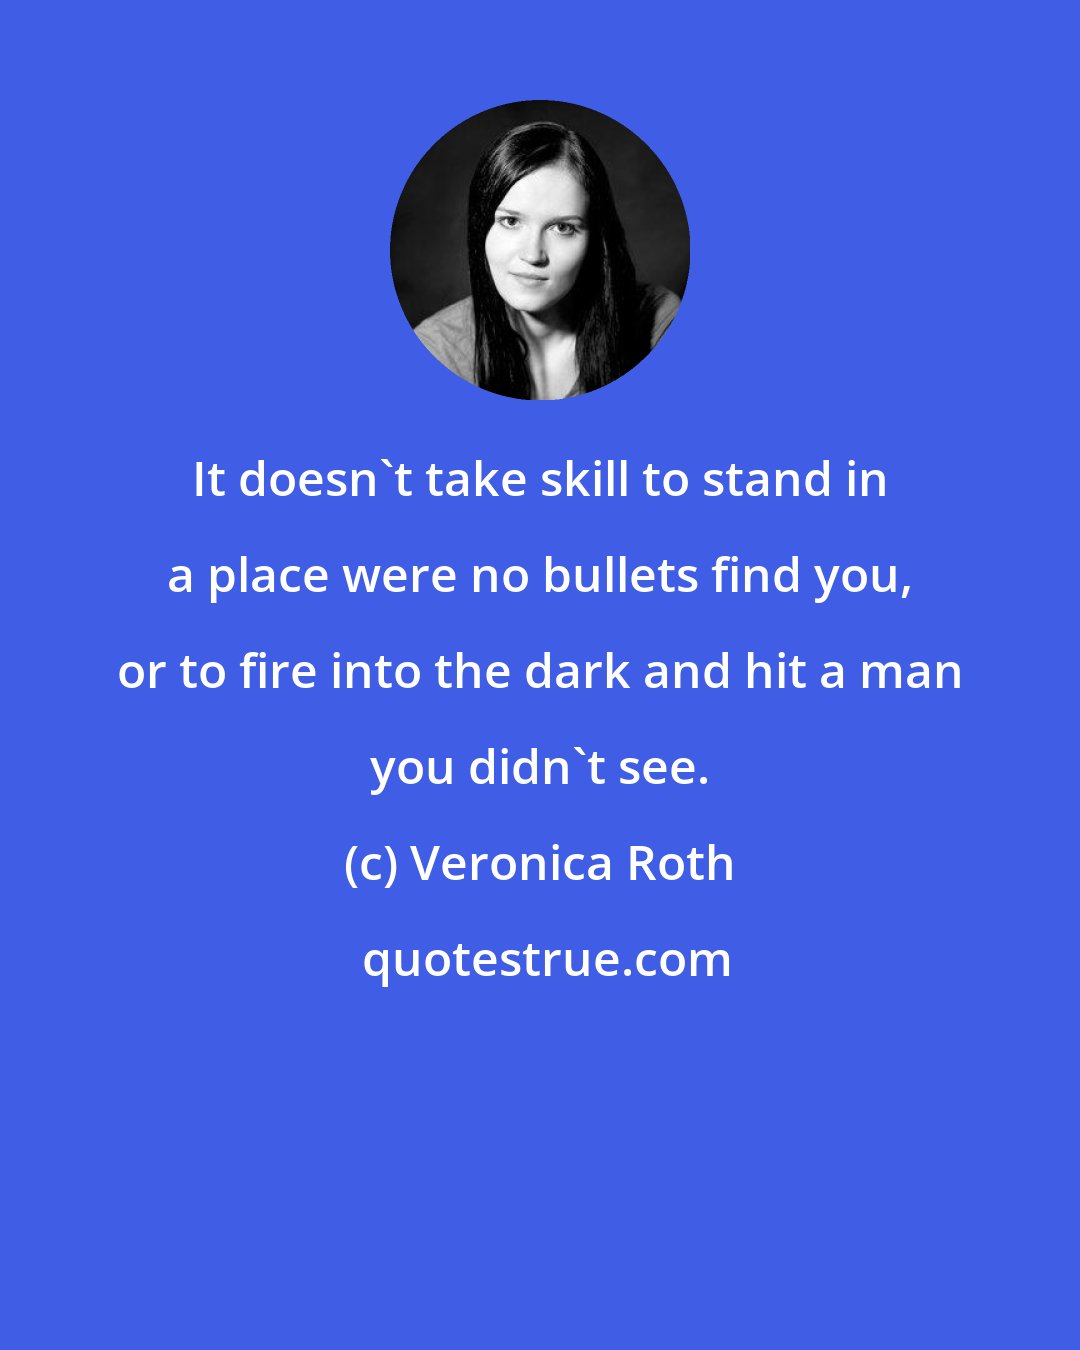 Veronica Roth: It doesn't take skill to stand in a place were no bullets find you, or to fire into the dark and hit a man you didn't see.